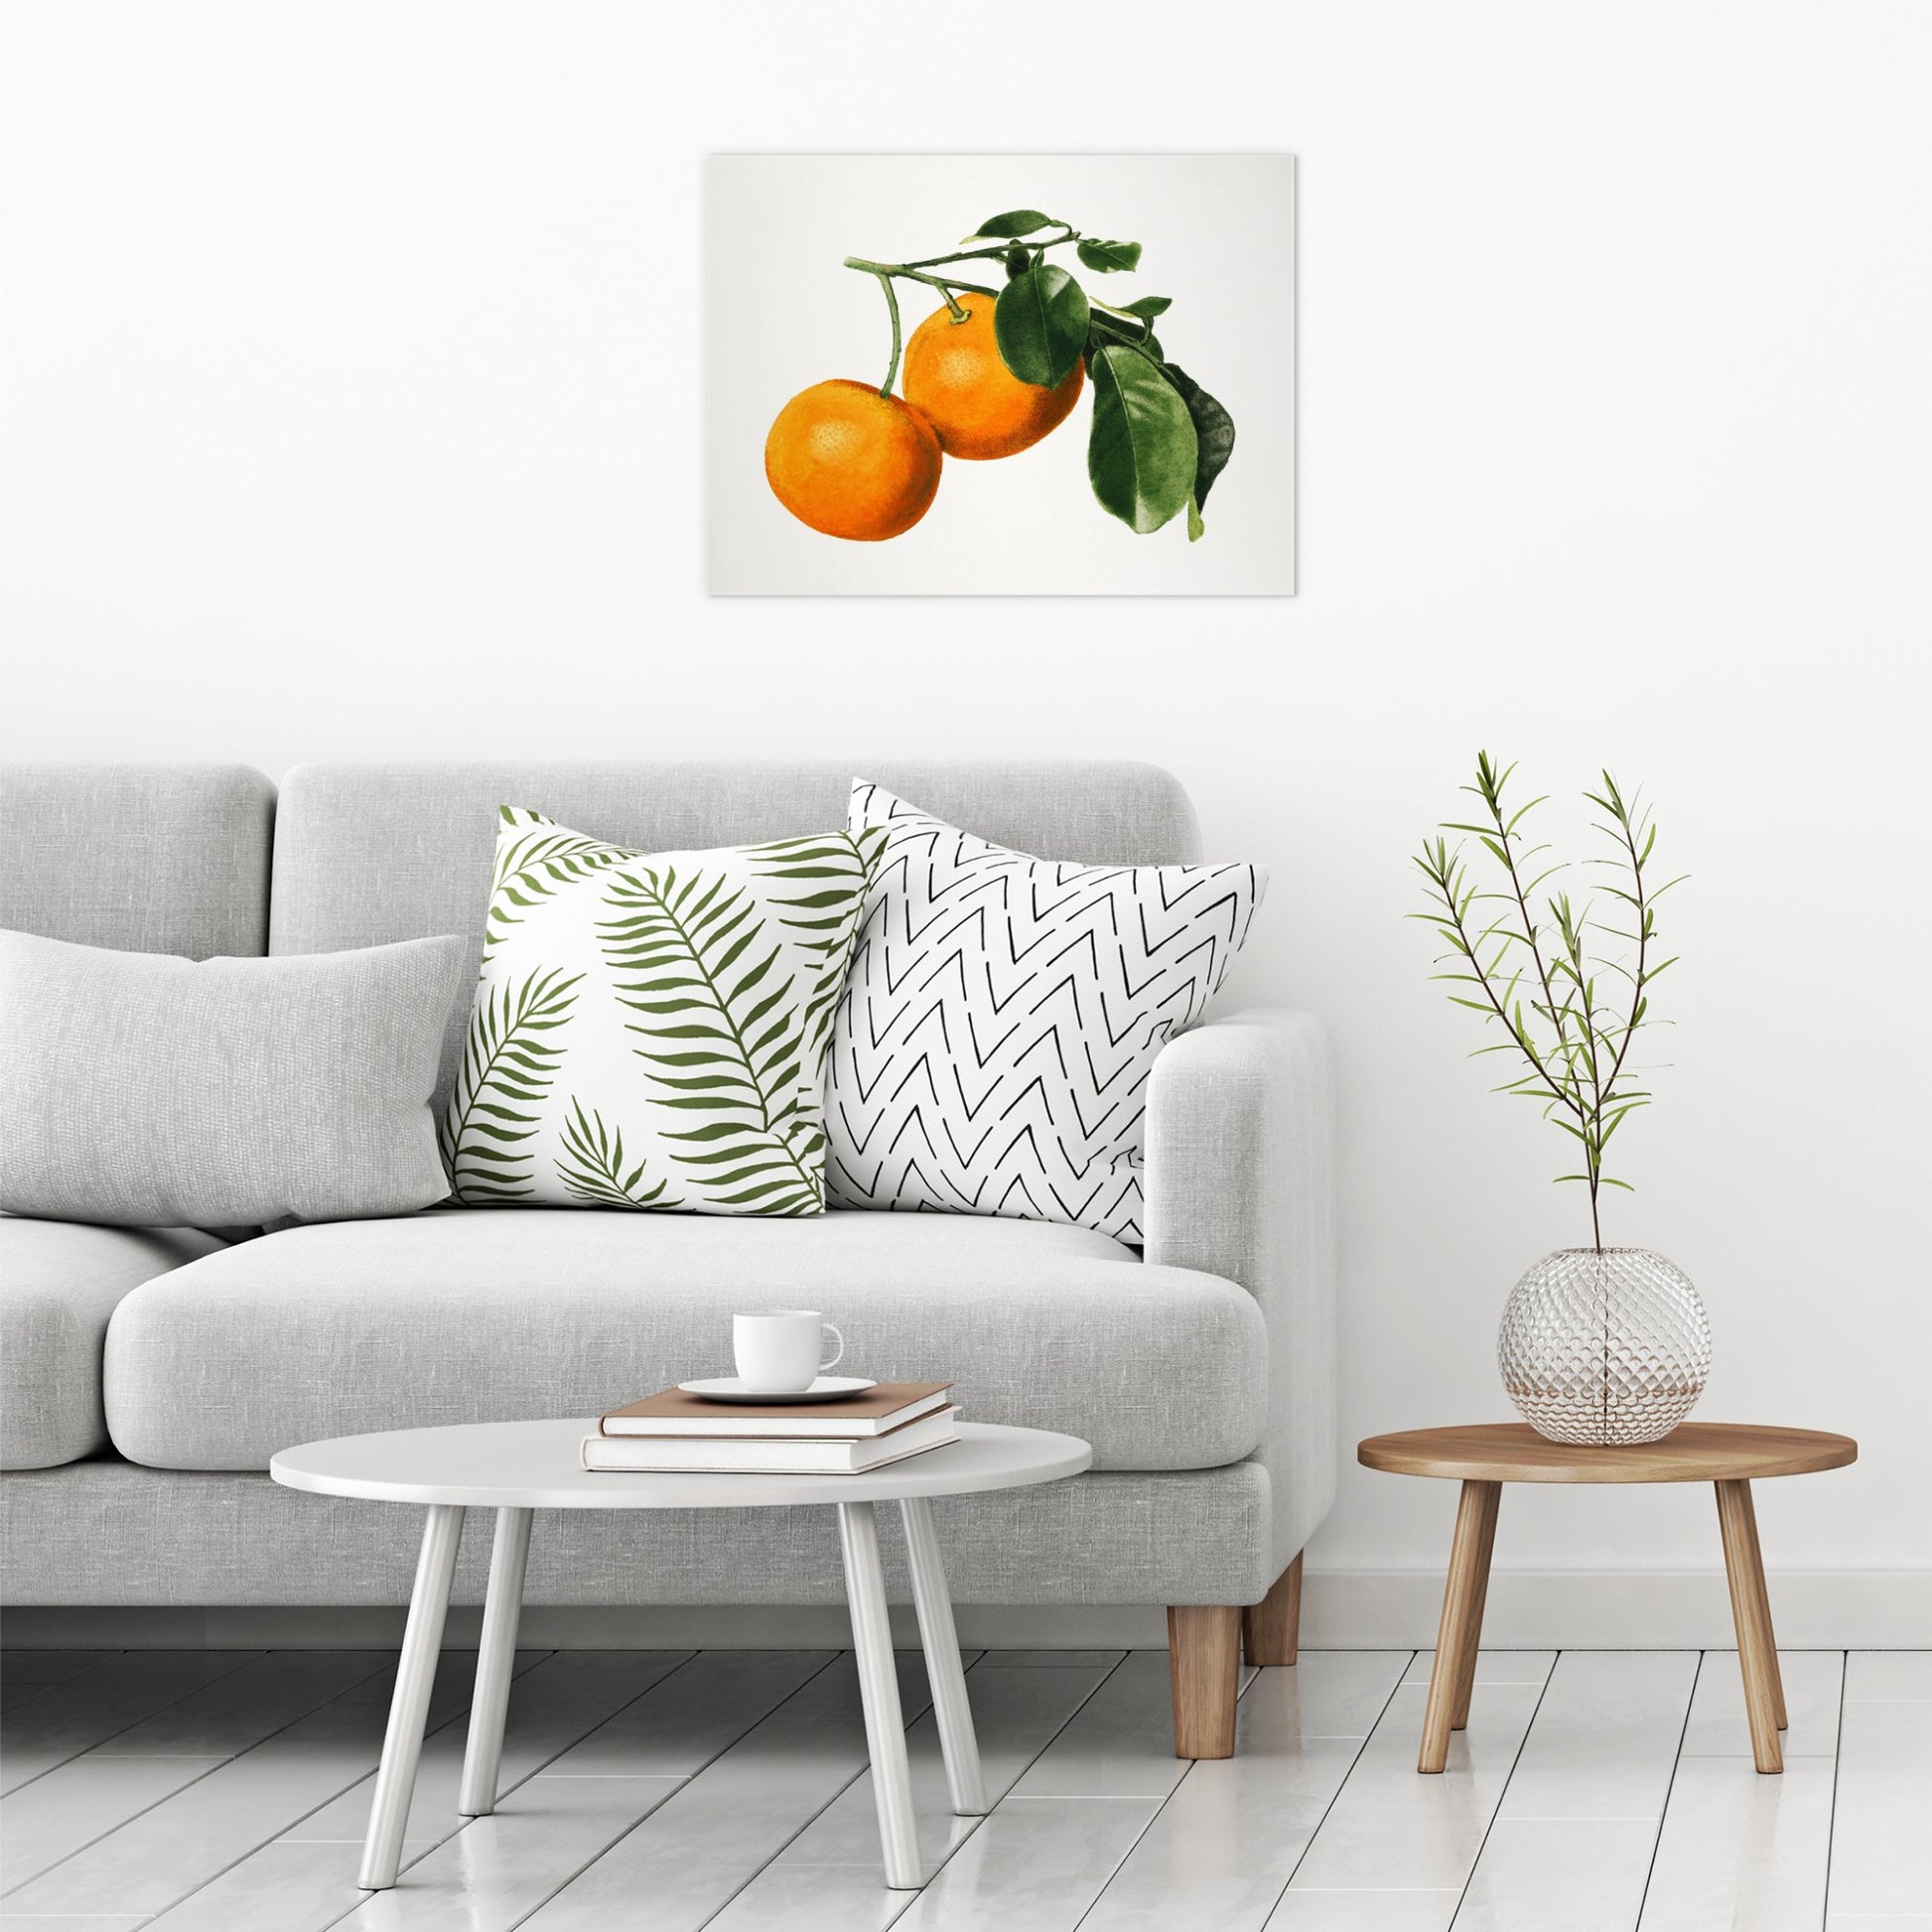 A contemporary modern room view showing a large size metal art poster display plate with printed design of a Vintage Watercolour Illustration of Oranges